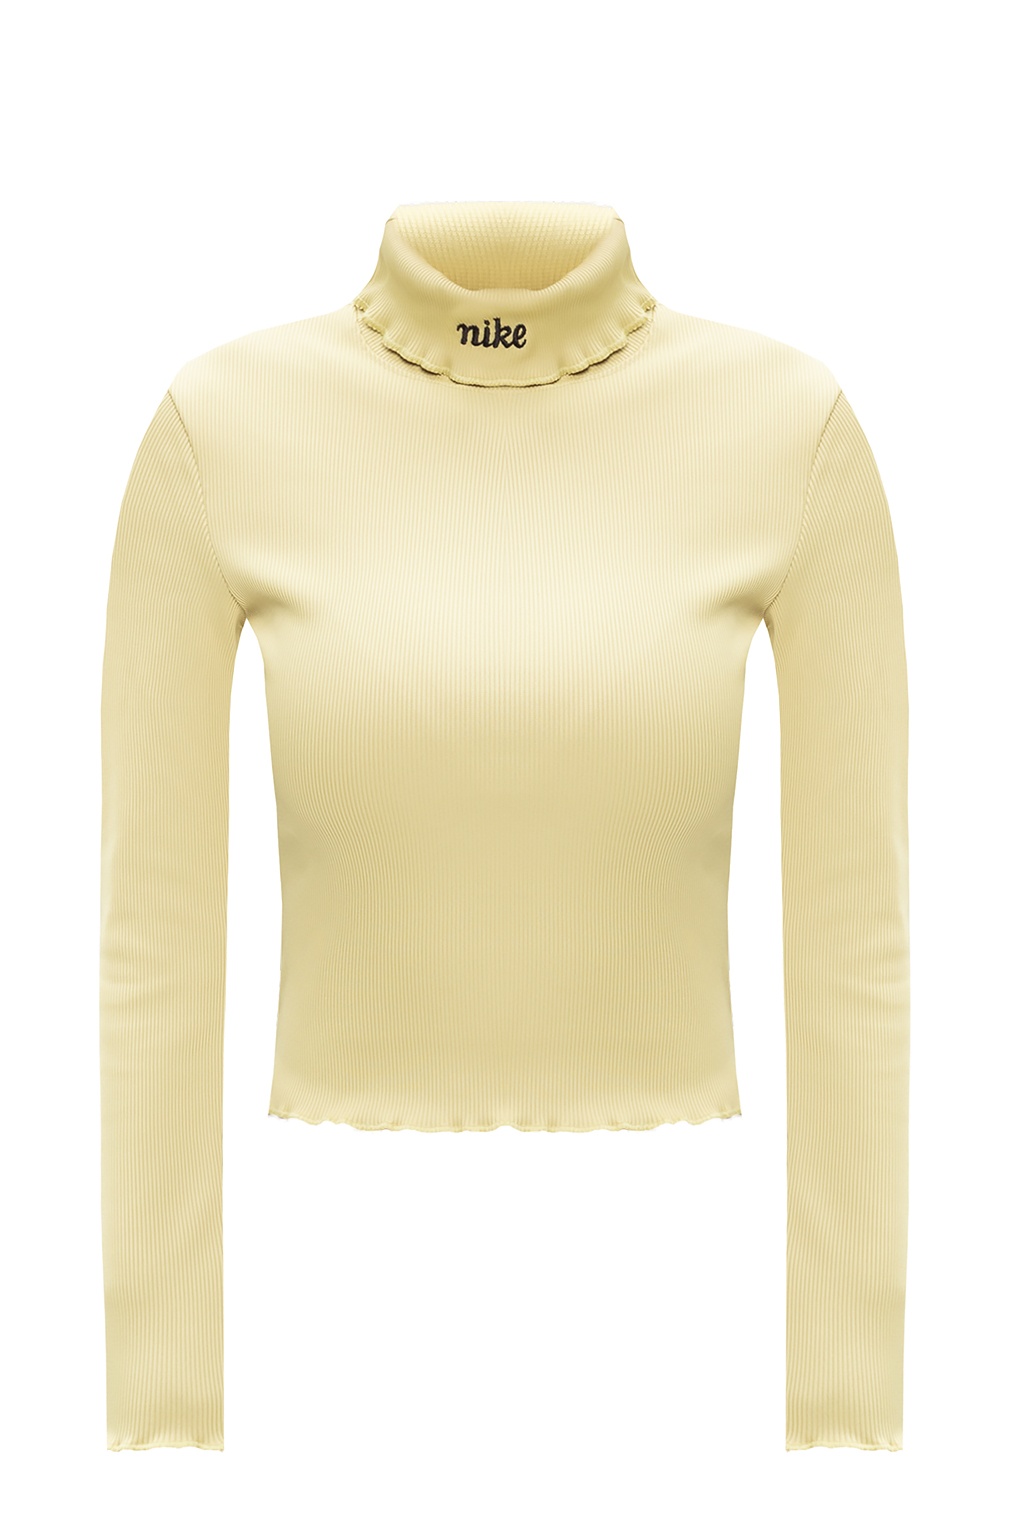 nike air ribbed high neck light beige long sleeve top